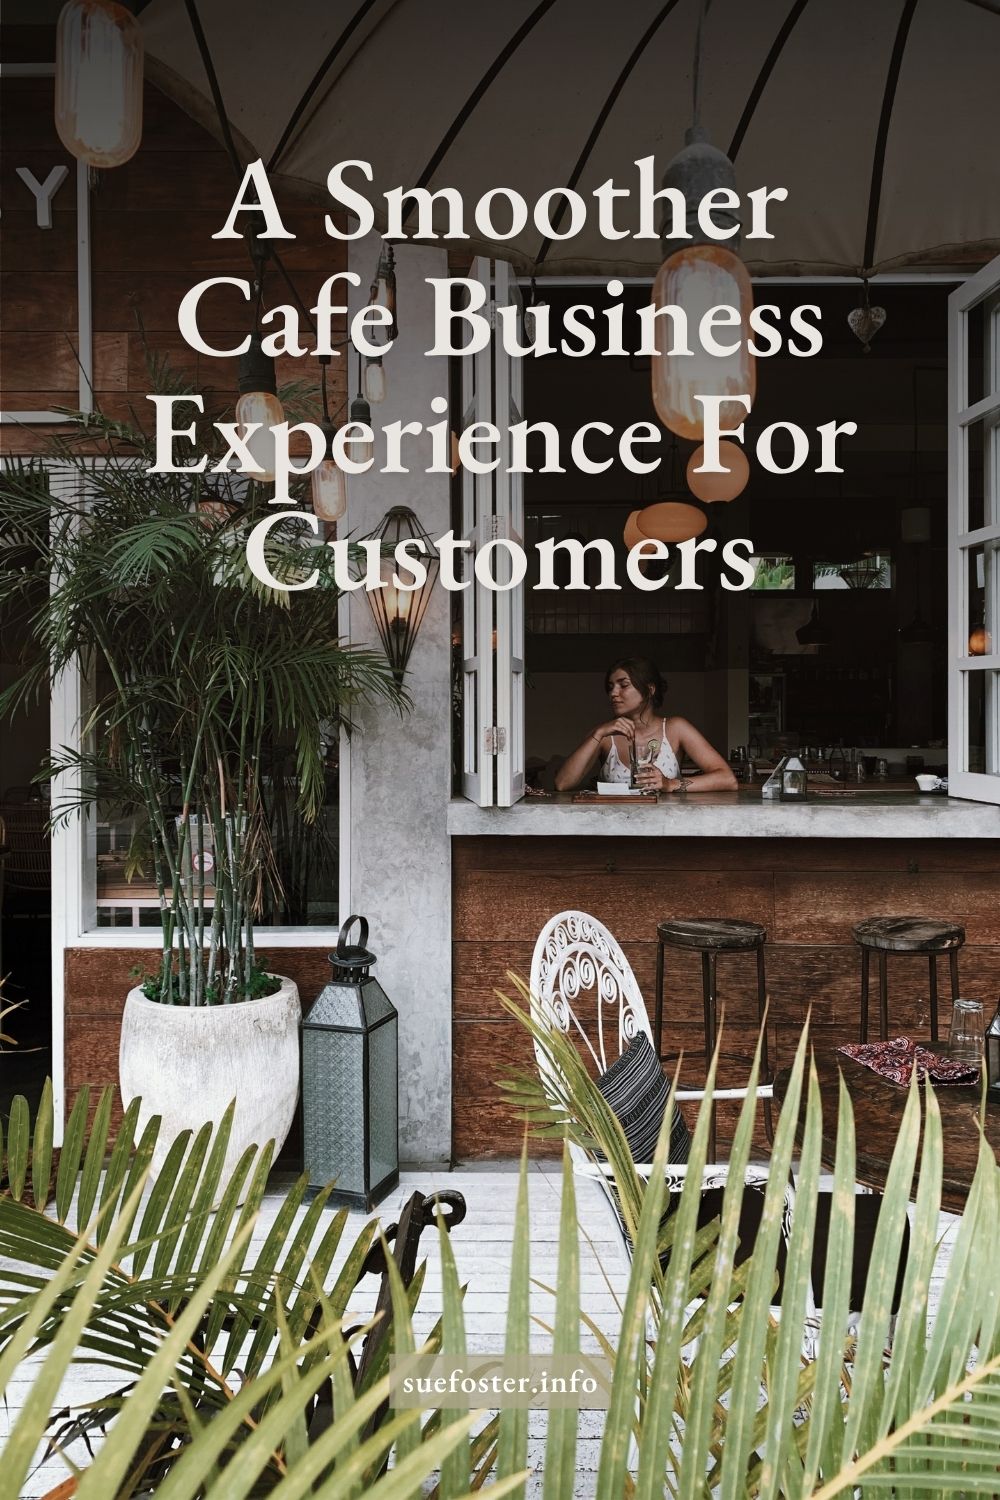 Unlike modern coffee shops, cafes offer a homely ambiance beyond coffee and cake. Could your cafe business give customers a better experience?